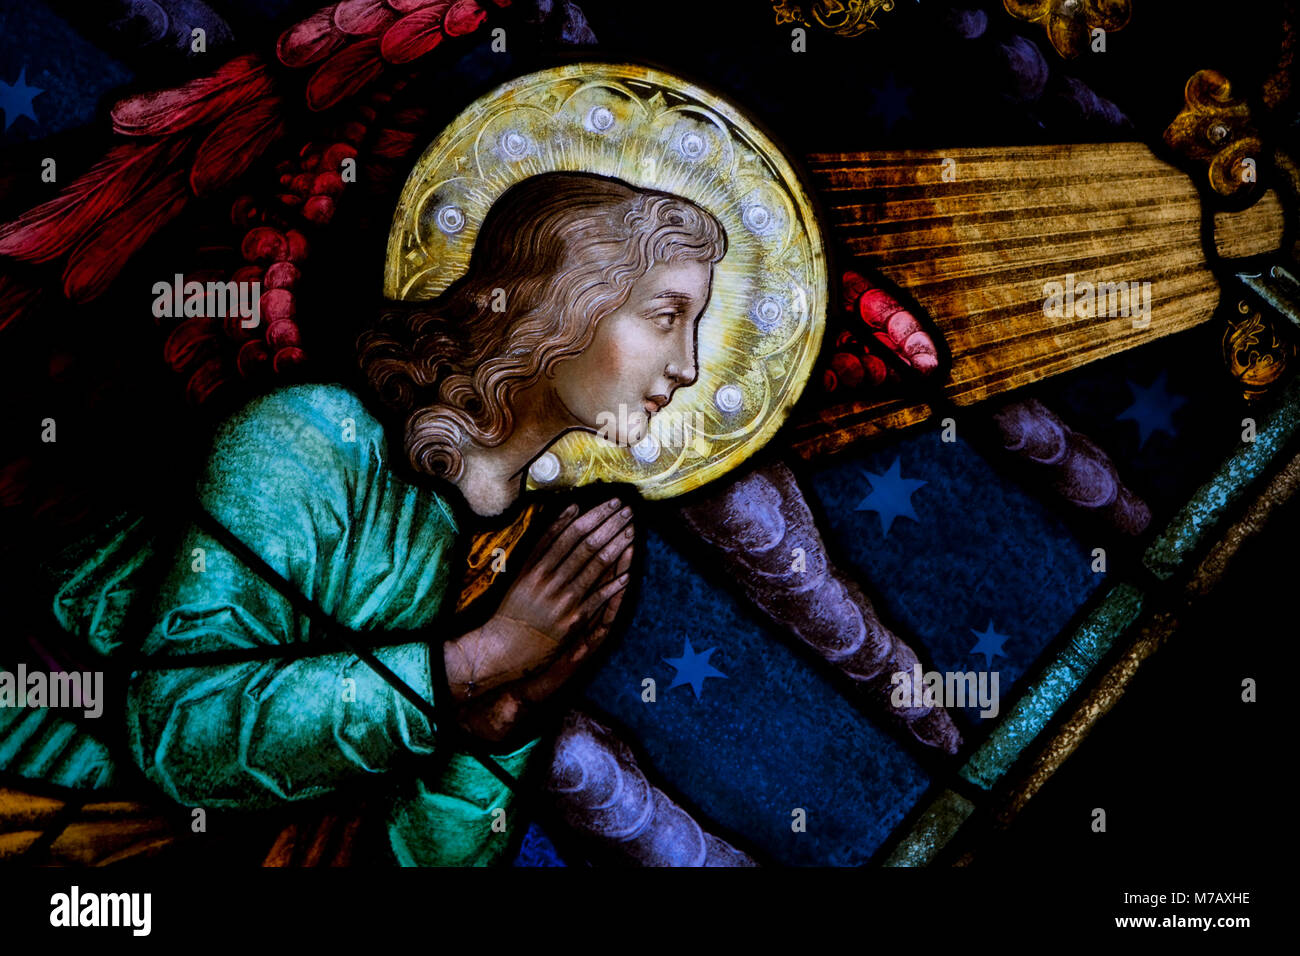 Paintings of Virgin Mary in a church, Chinatown, San Francisco, California, USA Stock Photo